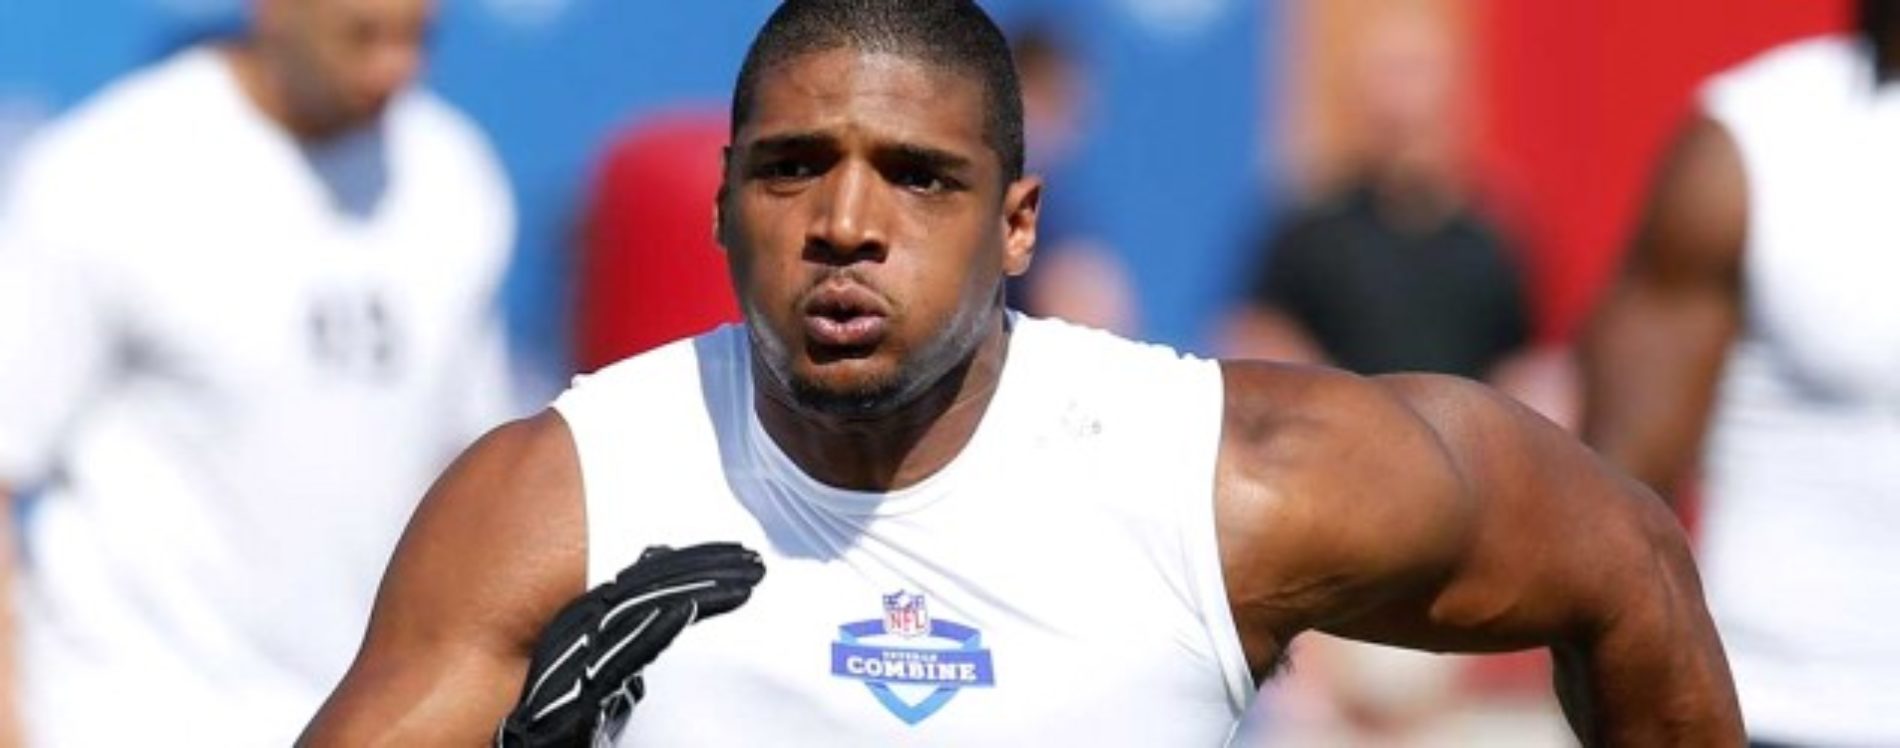 “I am not the only gay person in the NFL.” – Michael Sam